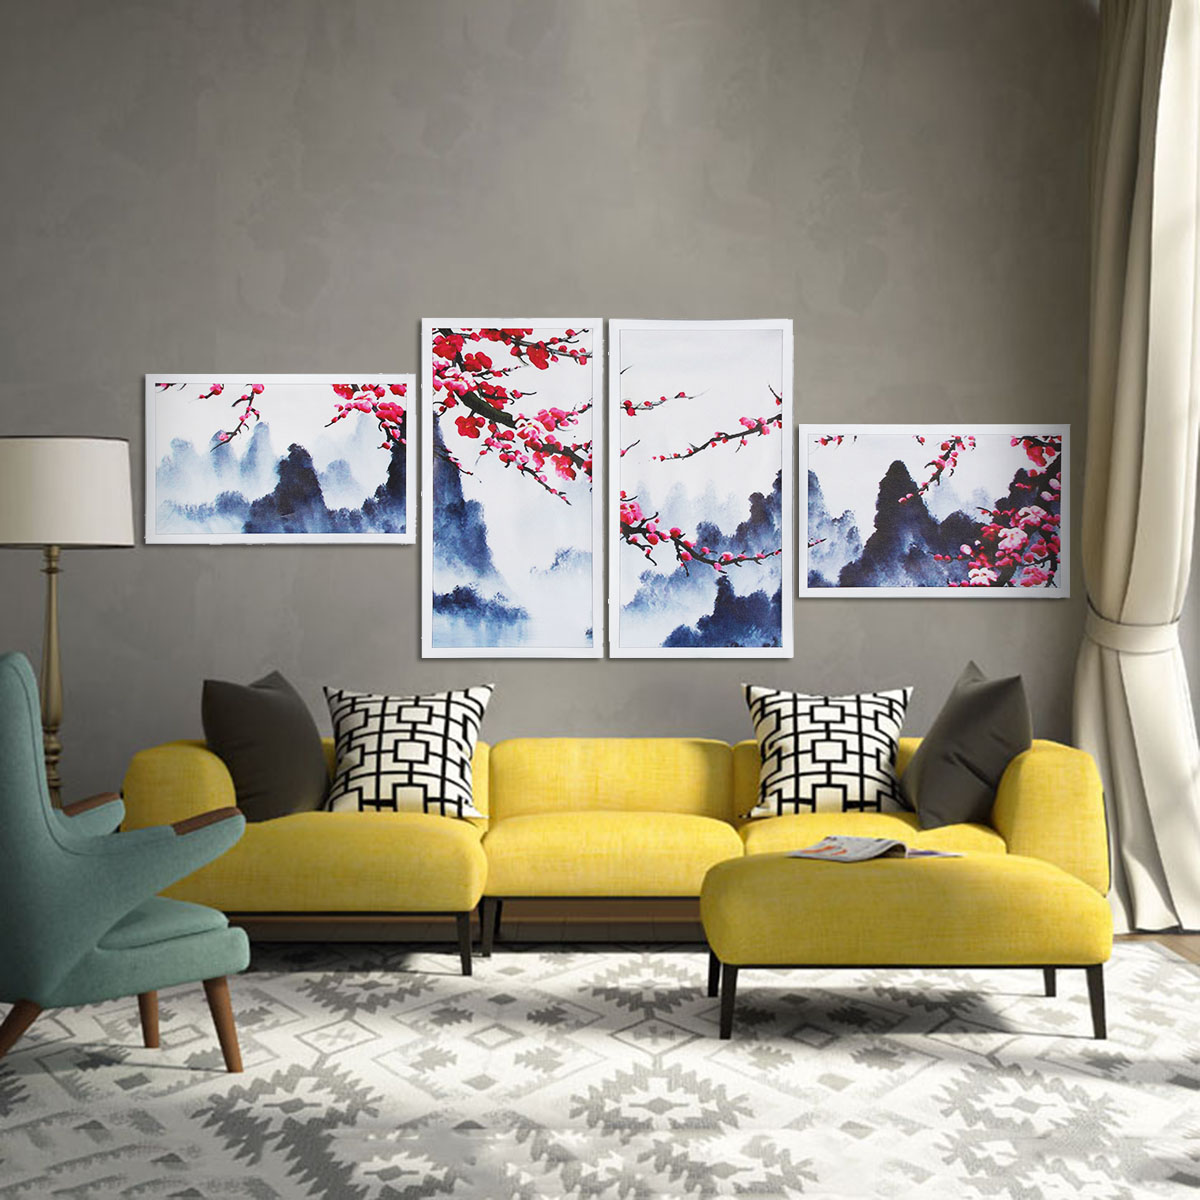 4-Pcs-Wall-Decorative-Painting-Modern-Abstract-Wall-Decor-Plum-Blossom-Art-Pictures-Canvas-Prints-Ho-1319561-6